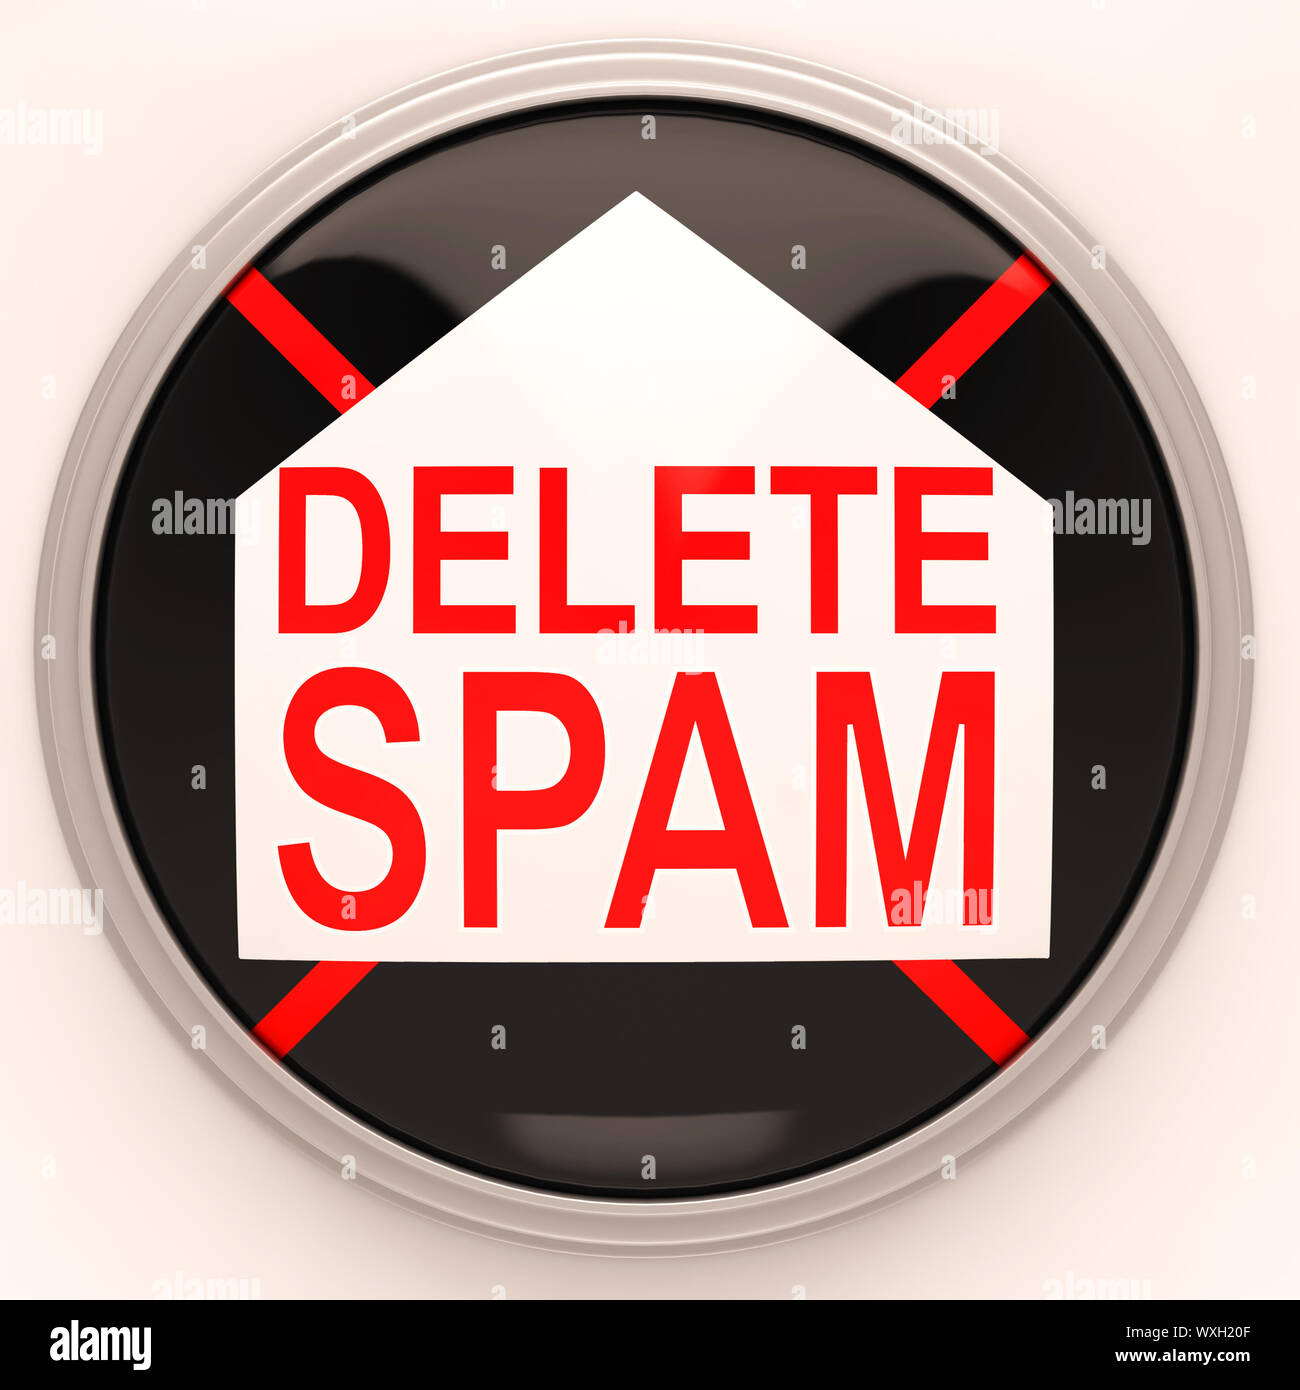 Delete Spam Showing Removing Unwanted Junk Email Stock Photo